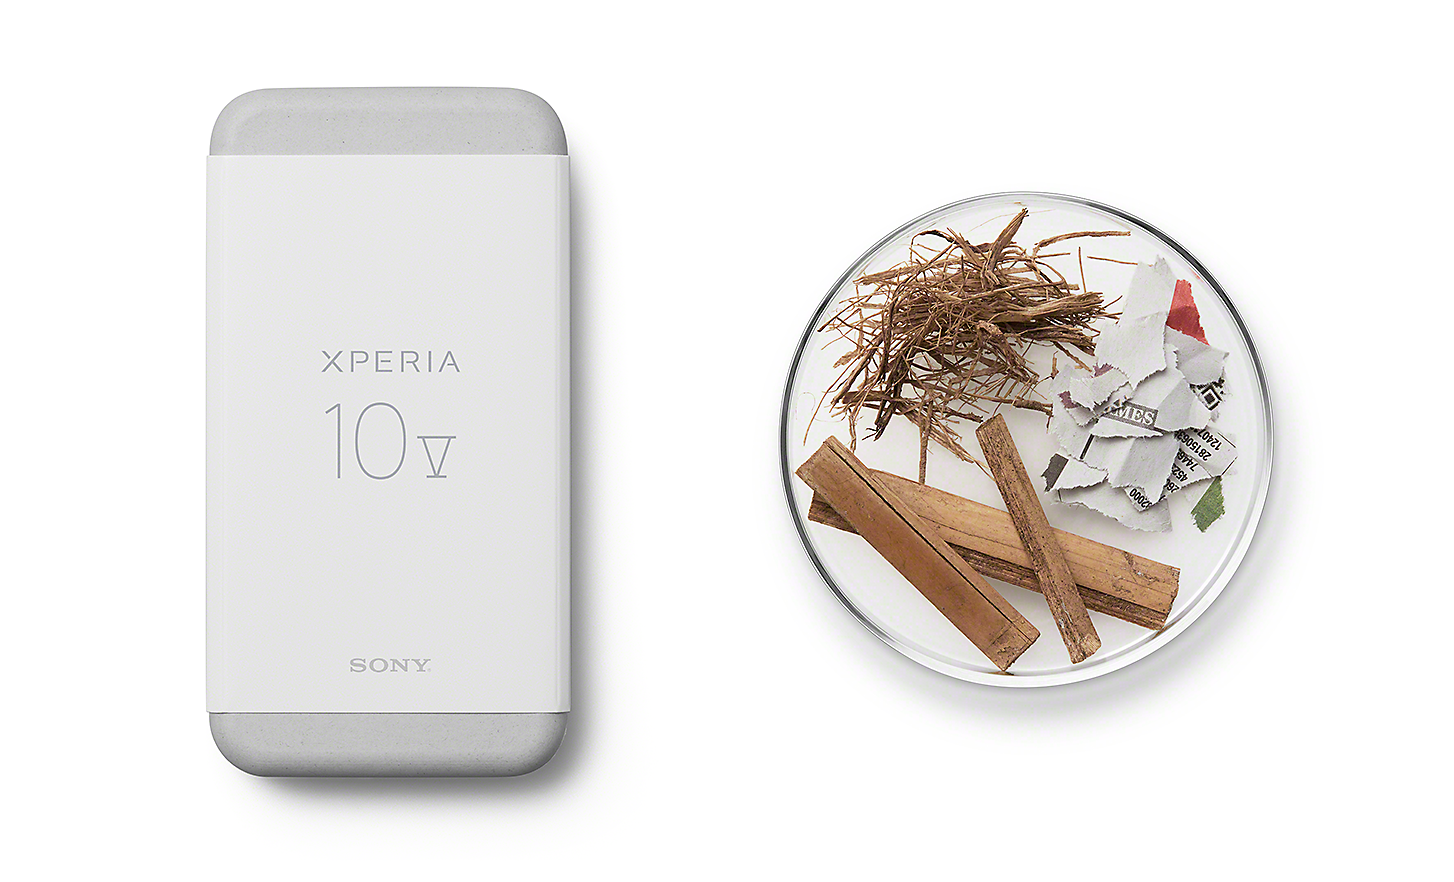 Xperia 10 V packaging alongside a selection of sustainable materials